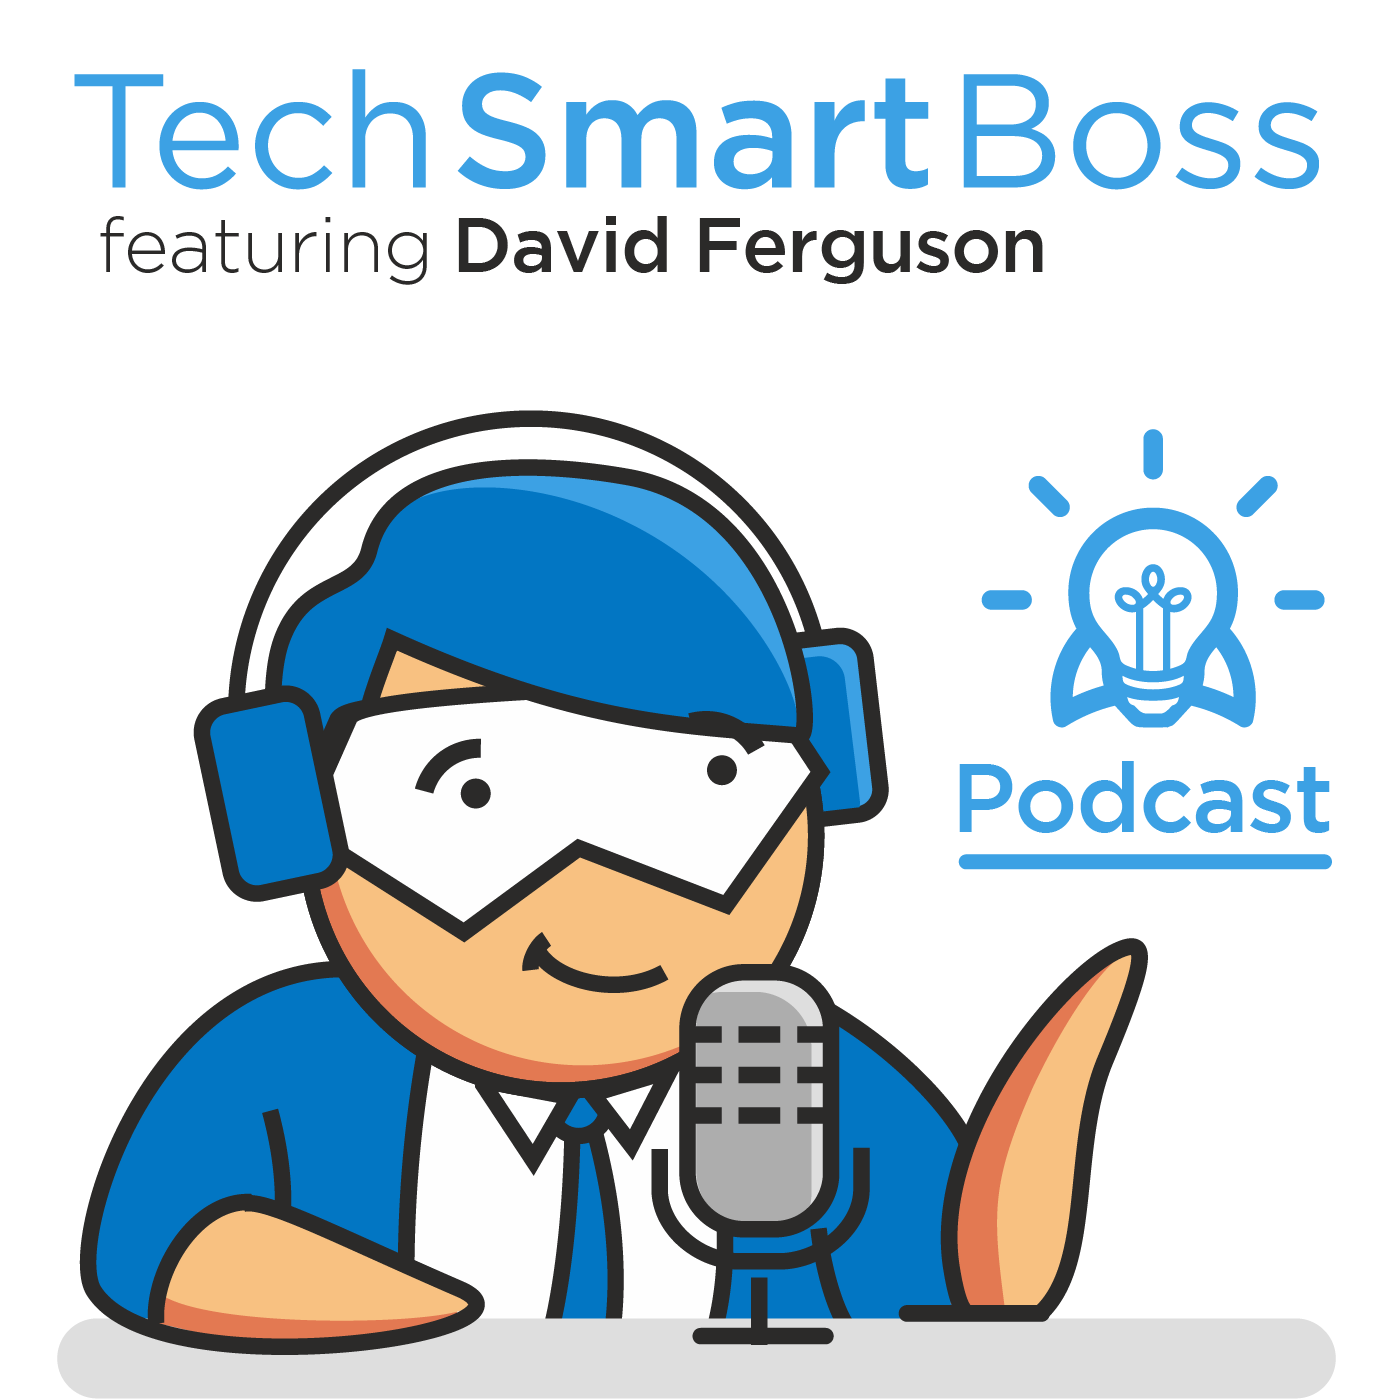 Episode 117: How To Do A/B Testing When You’re A Small Business (The Tech Smart Boss Way)